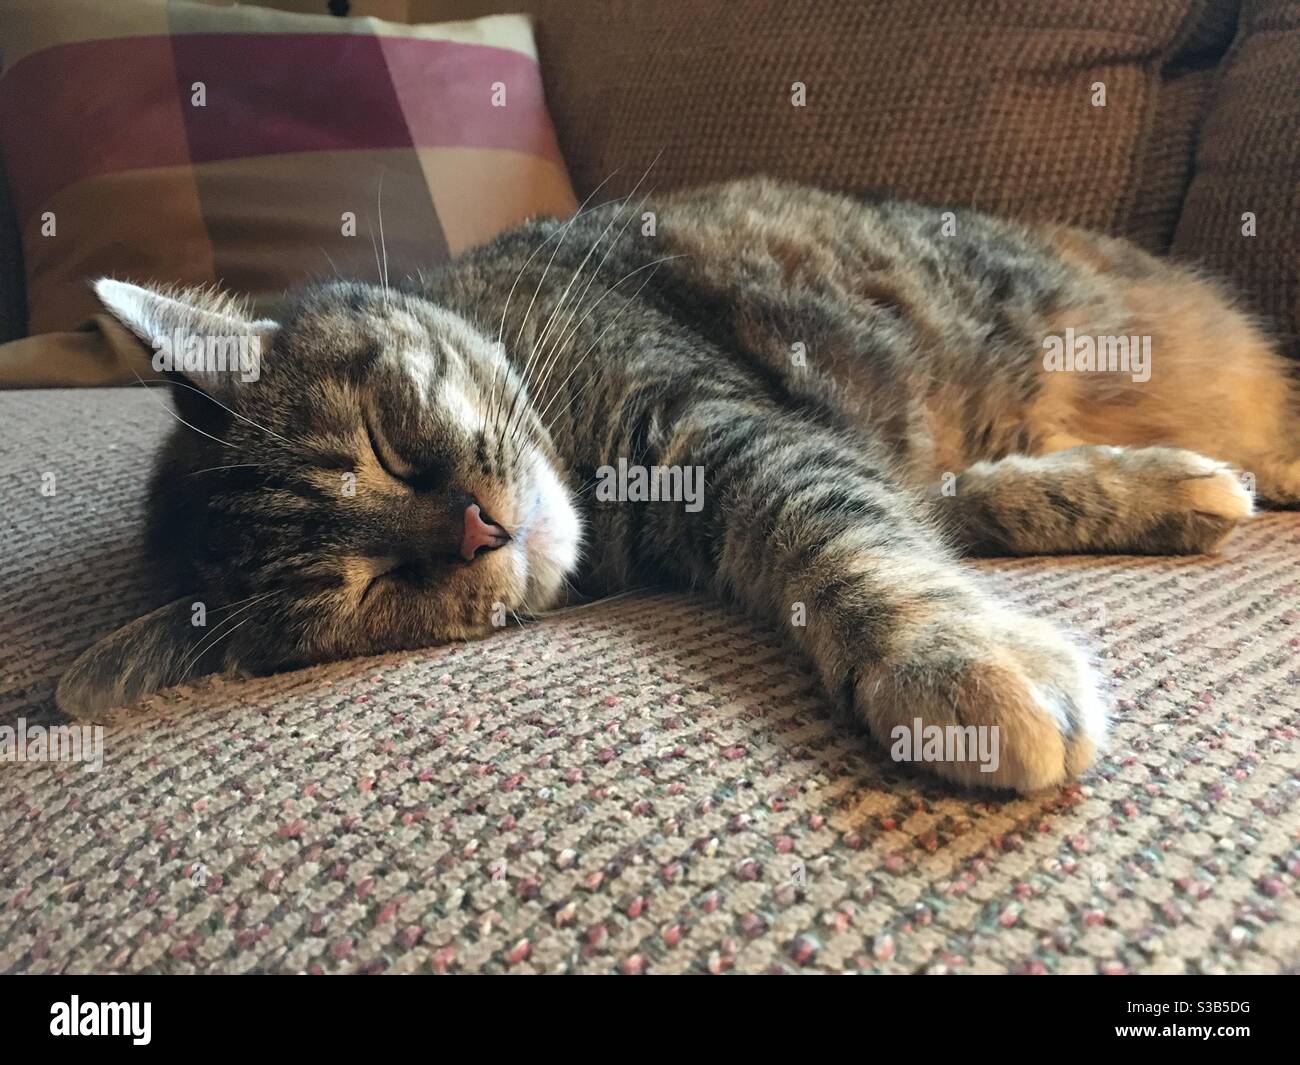 A contended female cat relaxes on a cushion. Stock Photo